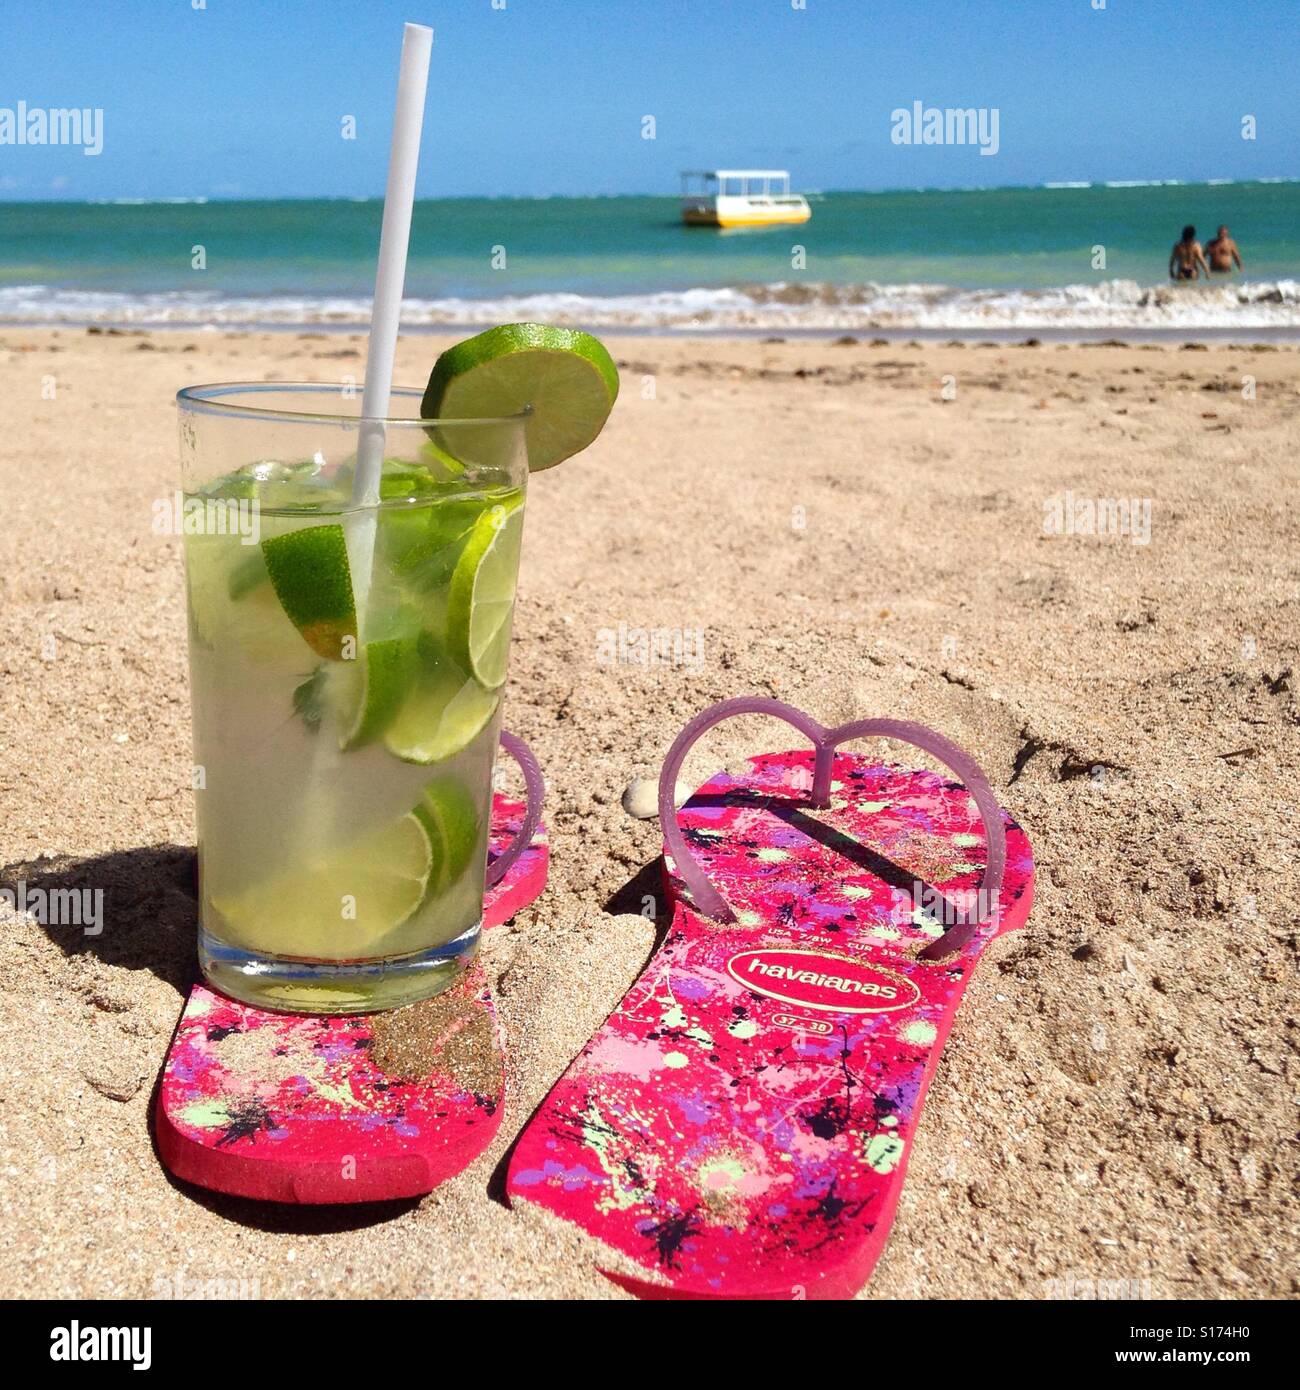 Vacation time with drinks on the beach. Stock Photo